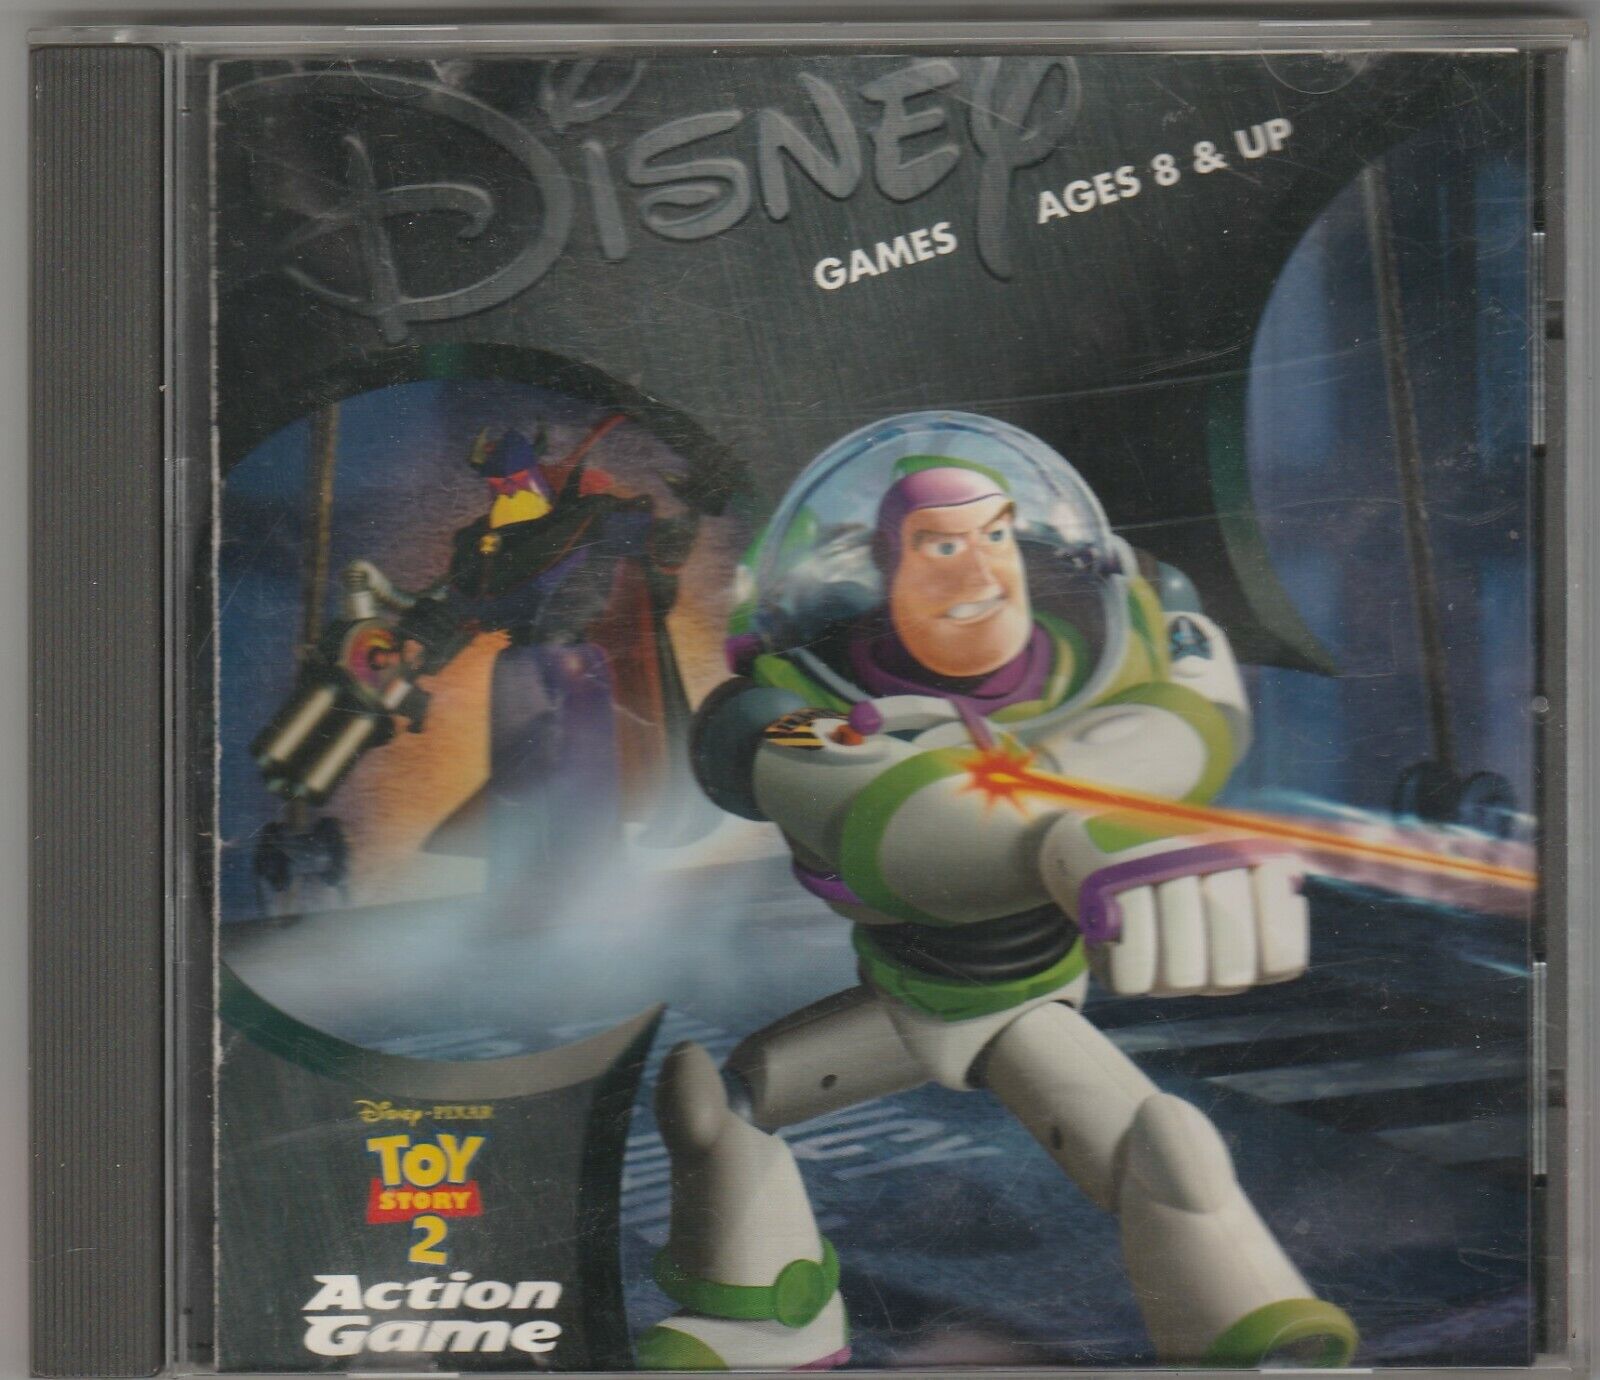 Toy Story 2 Action Game by Disney Pixar  for Windows 95 / 98 & Macintosh ~ CD-RO